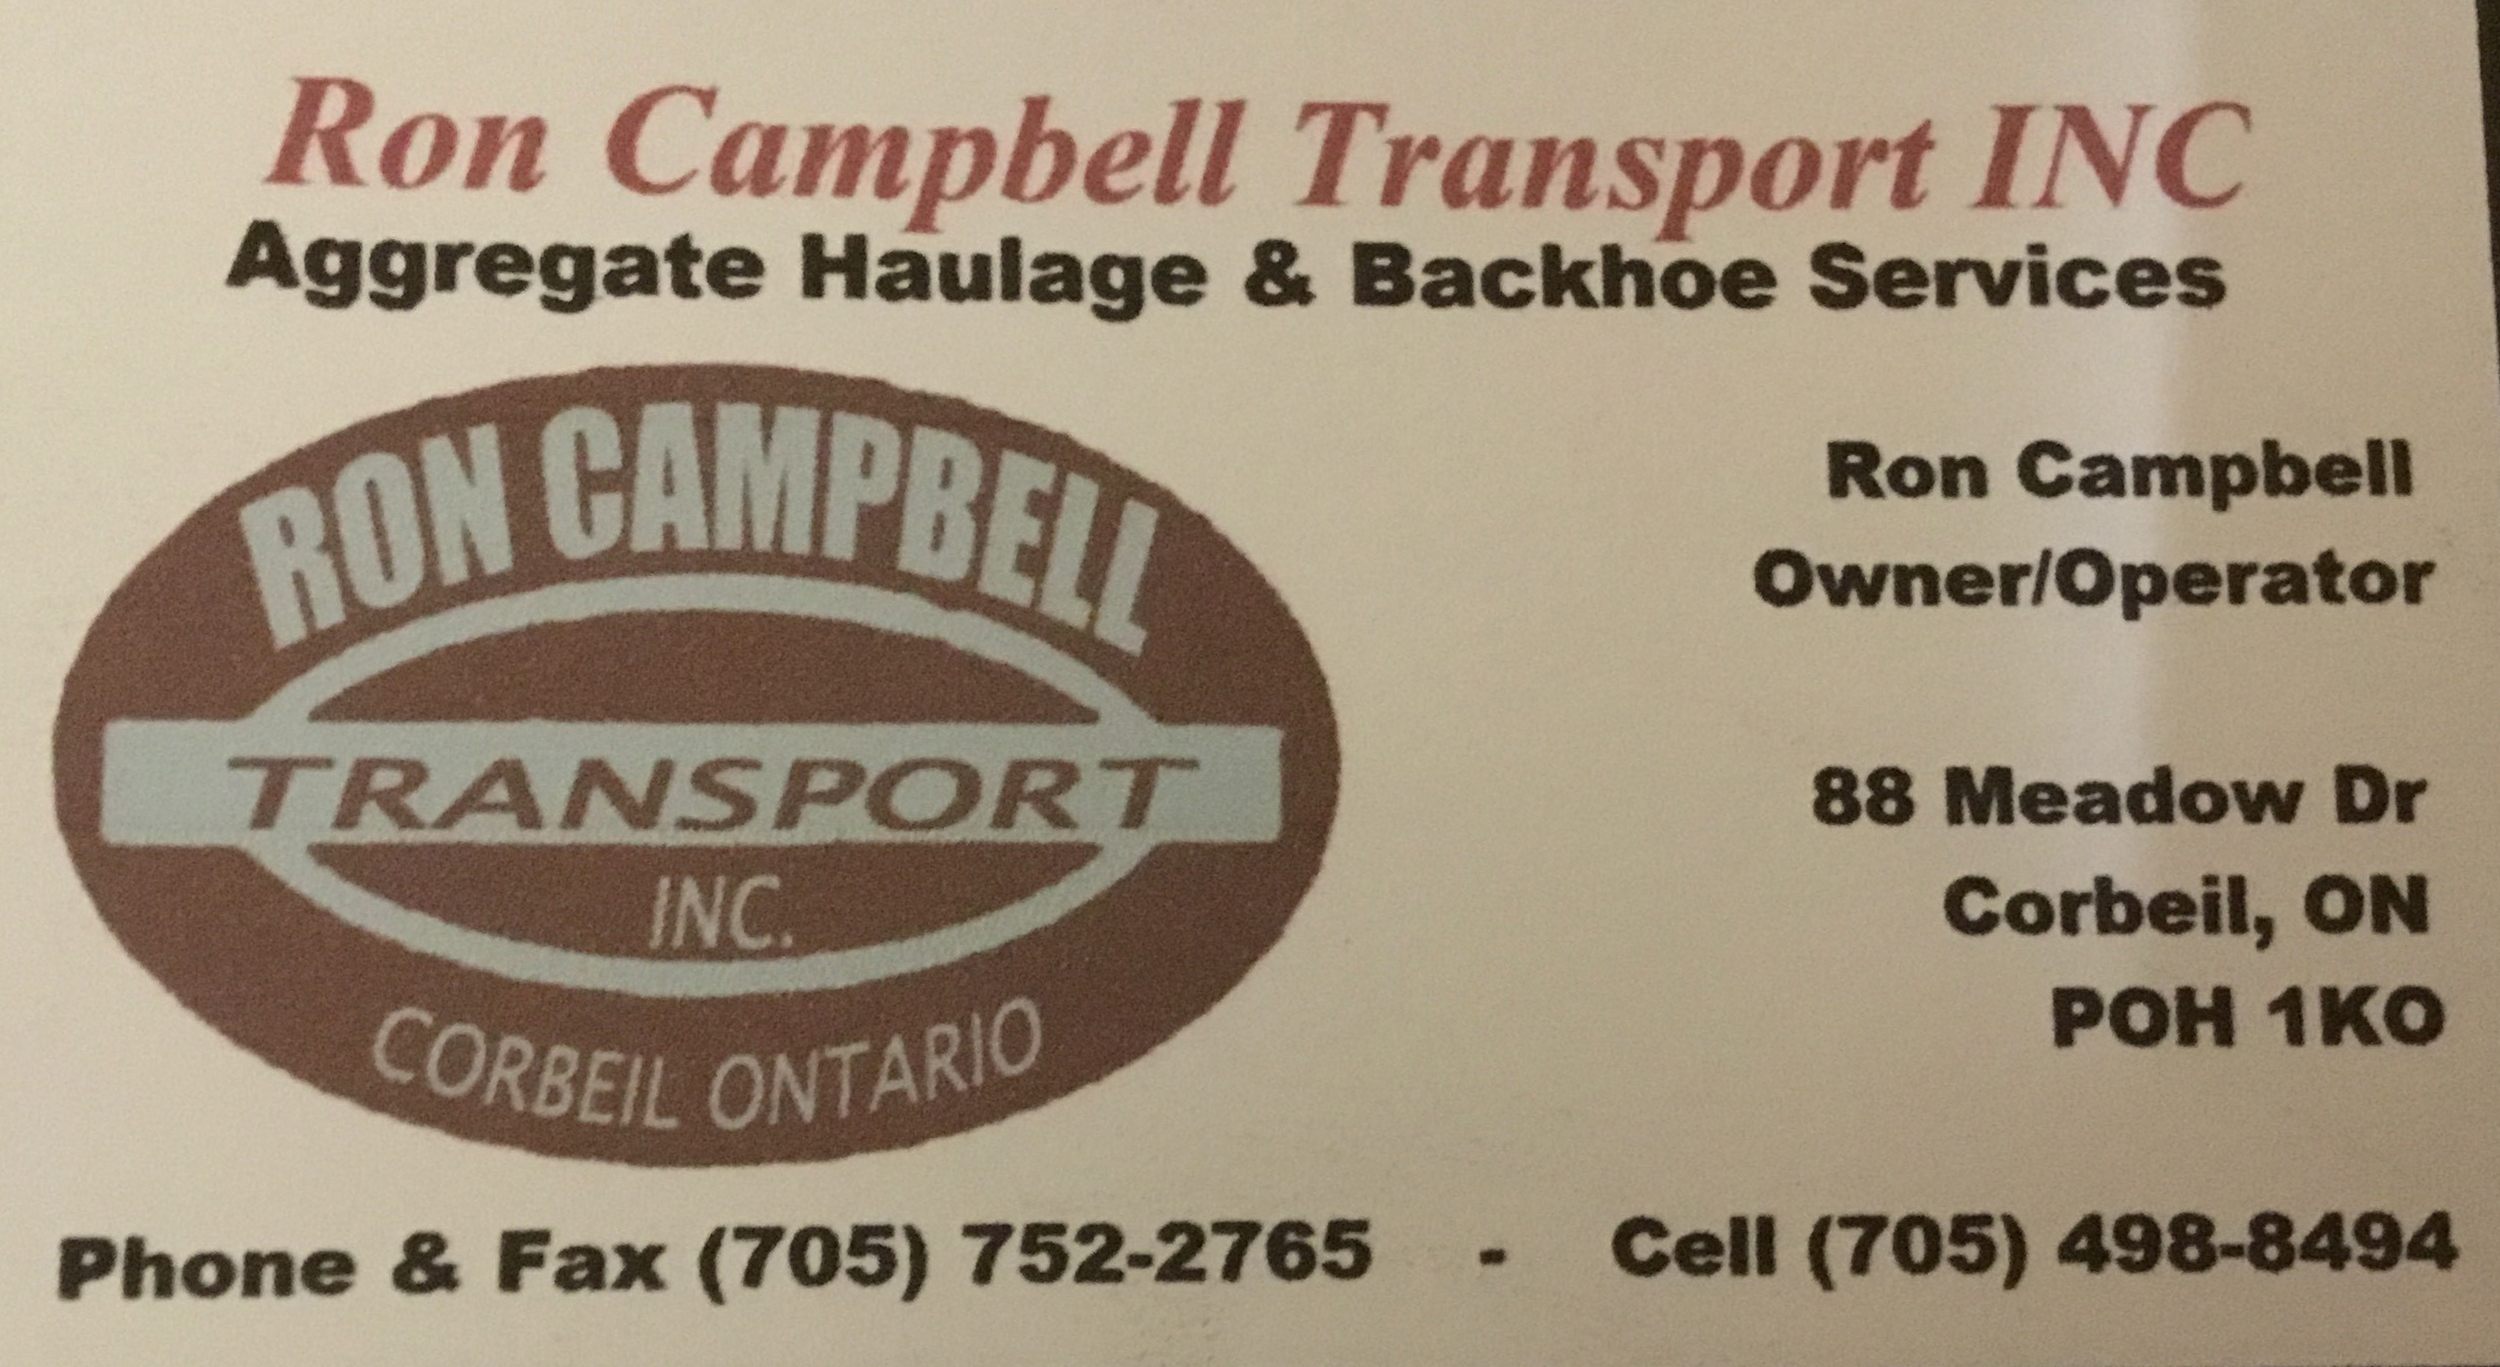 Ron Campbell Transport Inc.